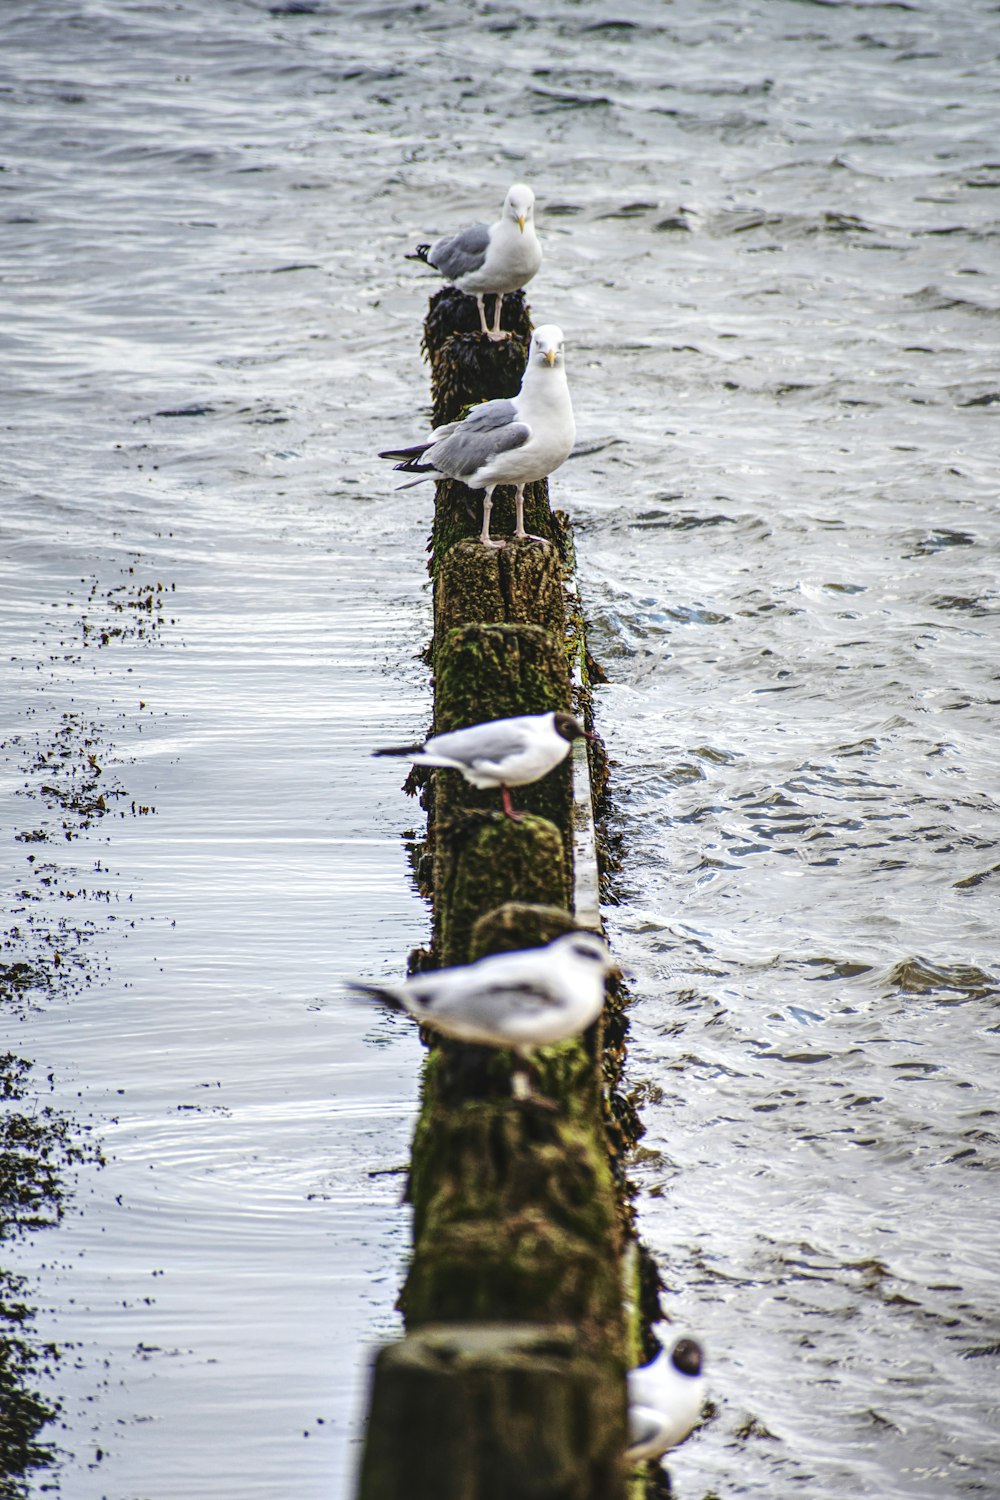 a group of seagulls sitting on a log in the water